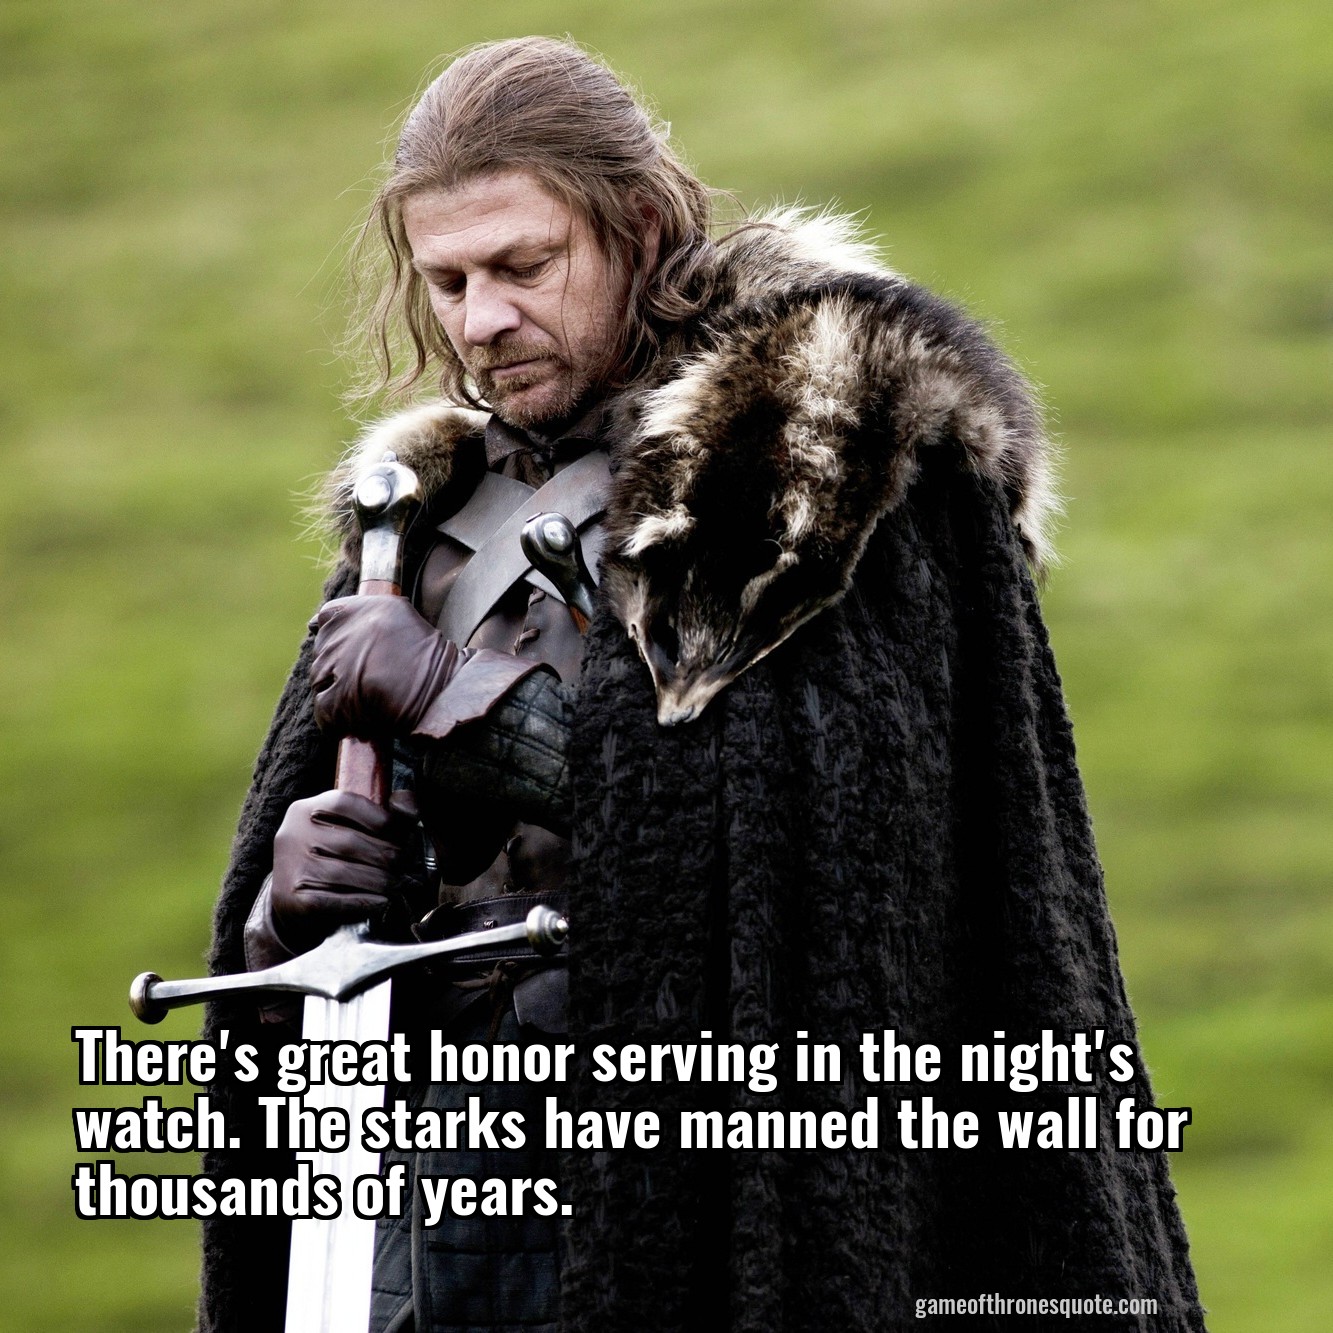 There's great honor serving in the night's watch. The starks have manned the wall for thousands of years.